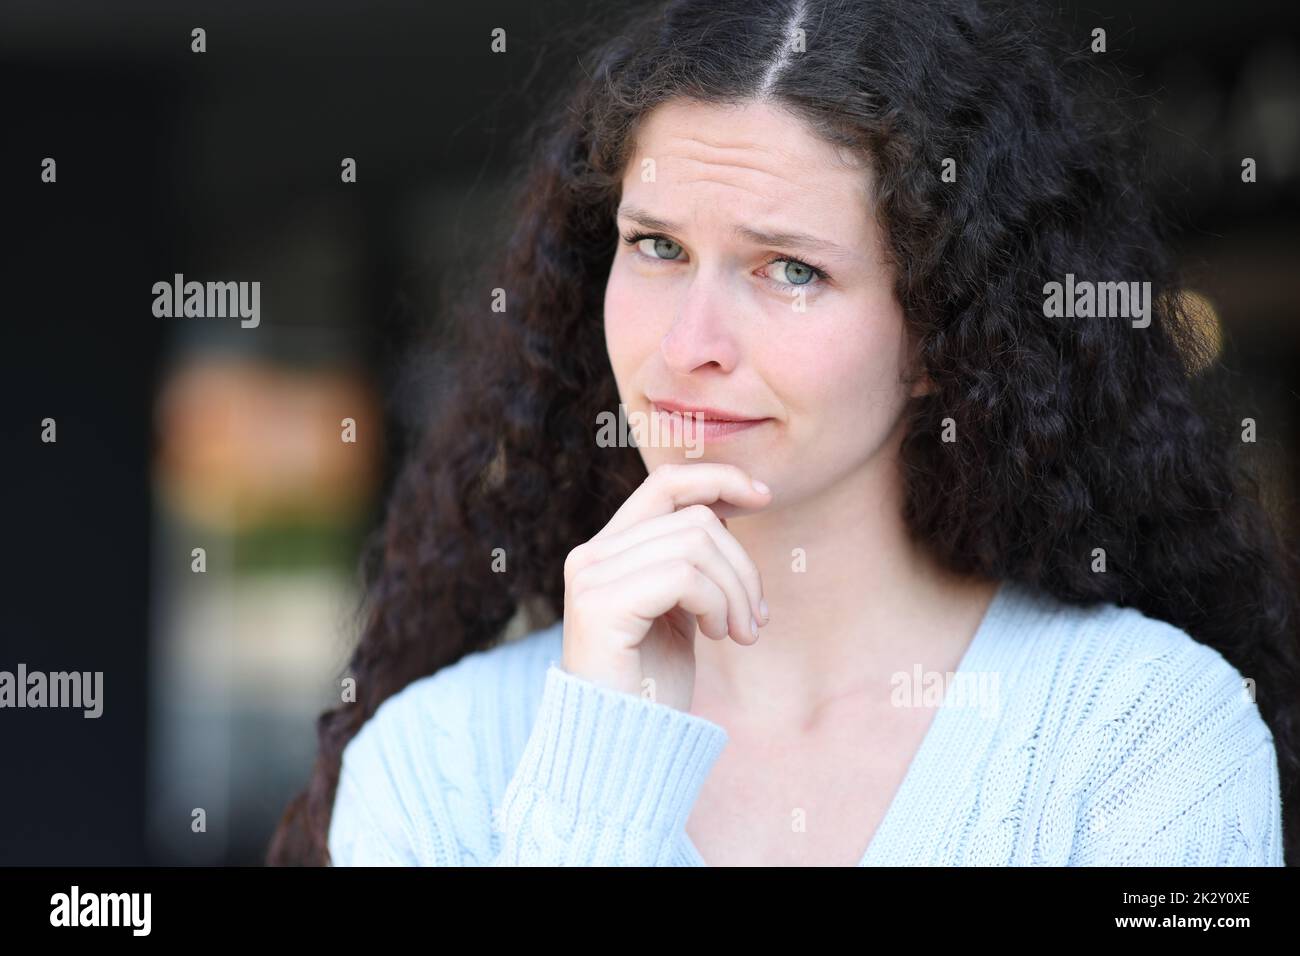 Suspicious woman looking at camera in the street Stock Photo